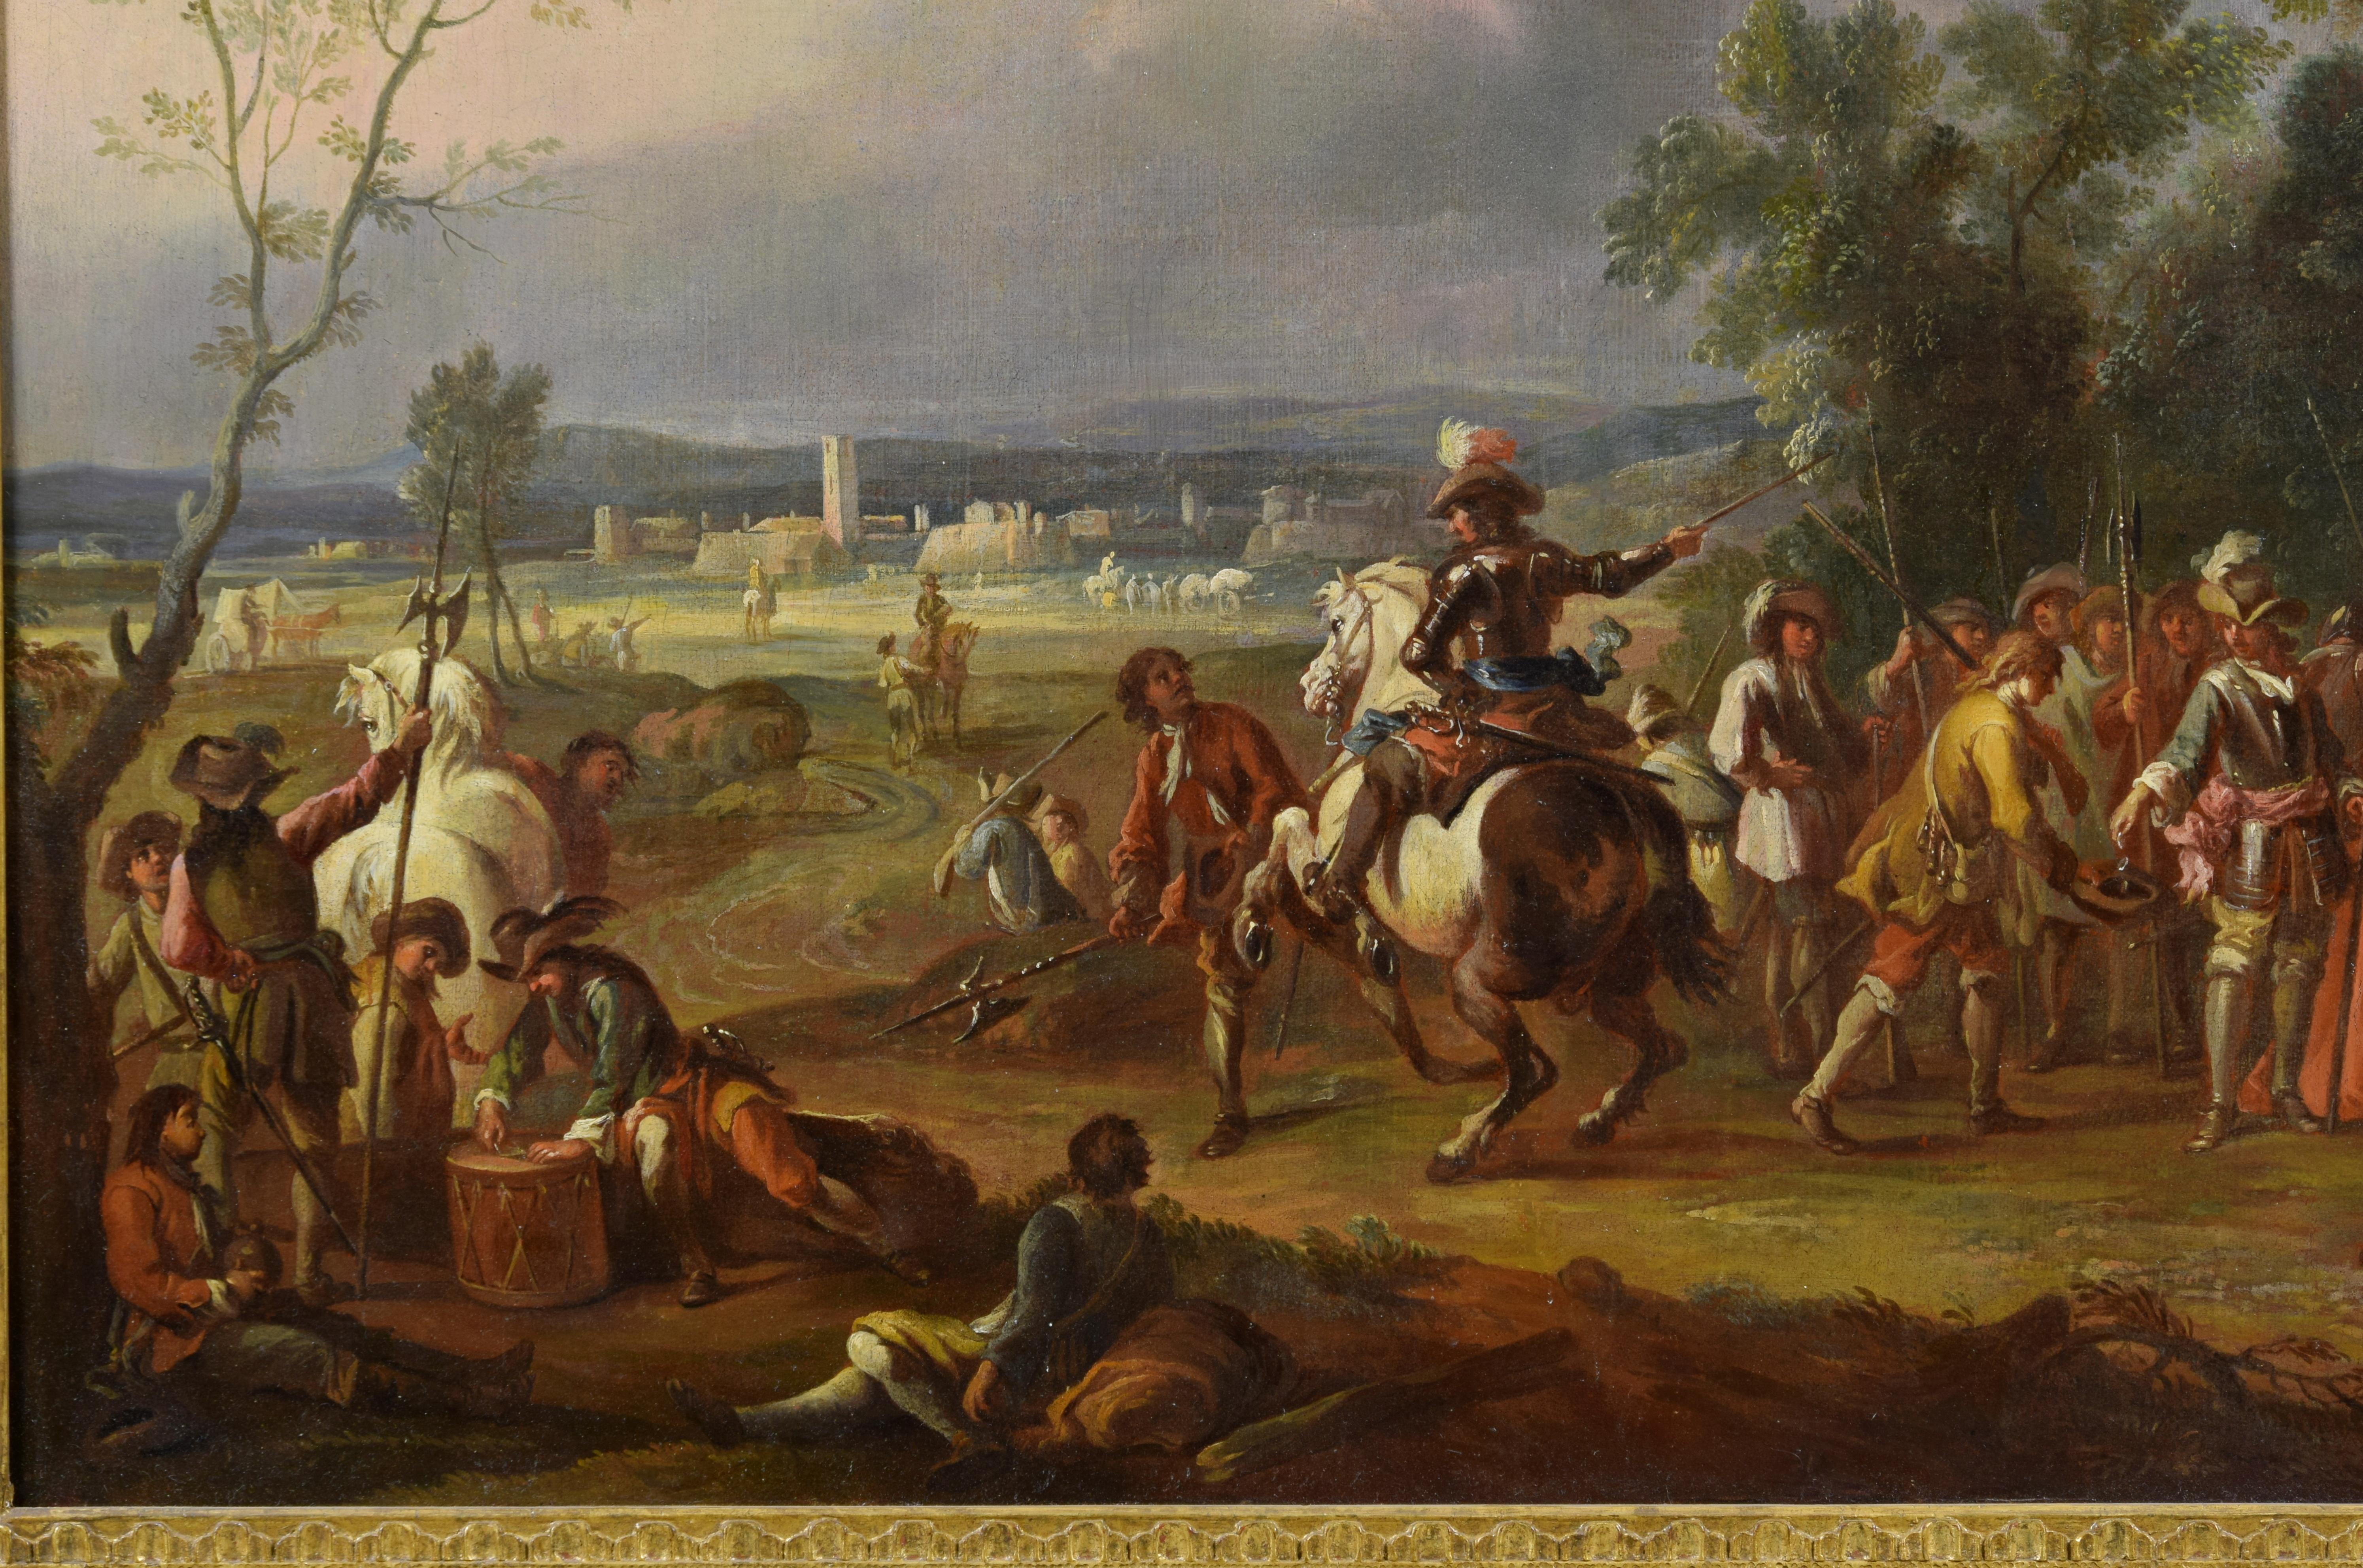 18th Century 17th Century, Dutch Oil on Canvas Painting with the Pay of Soldiers